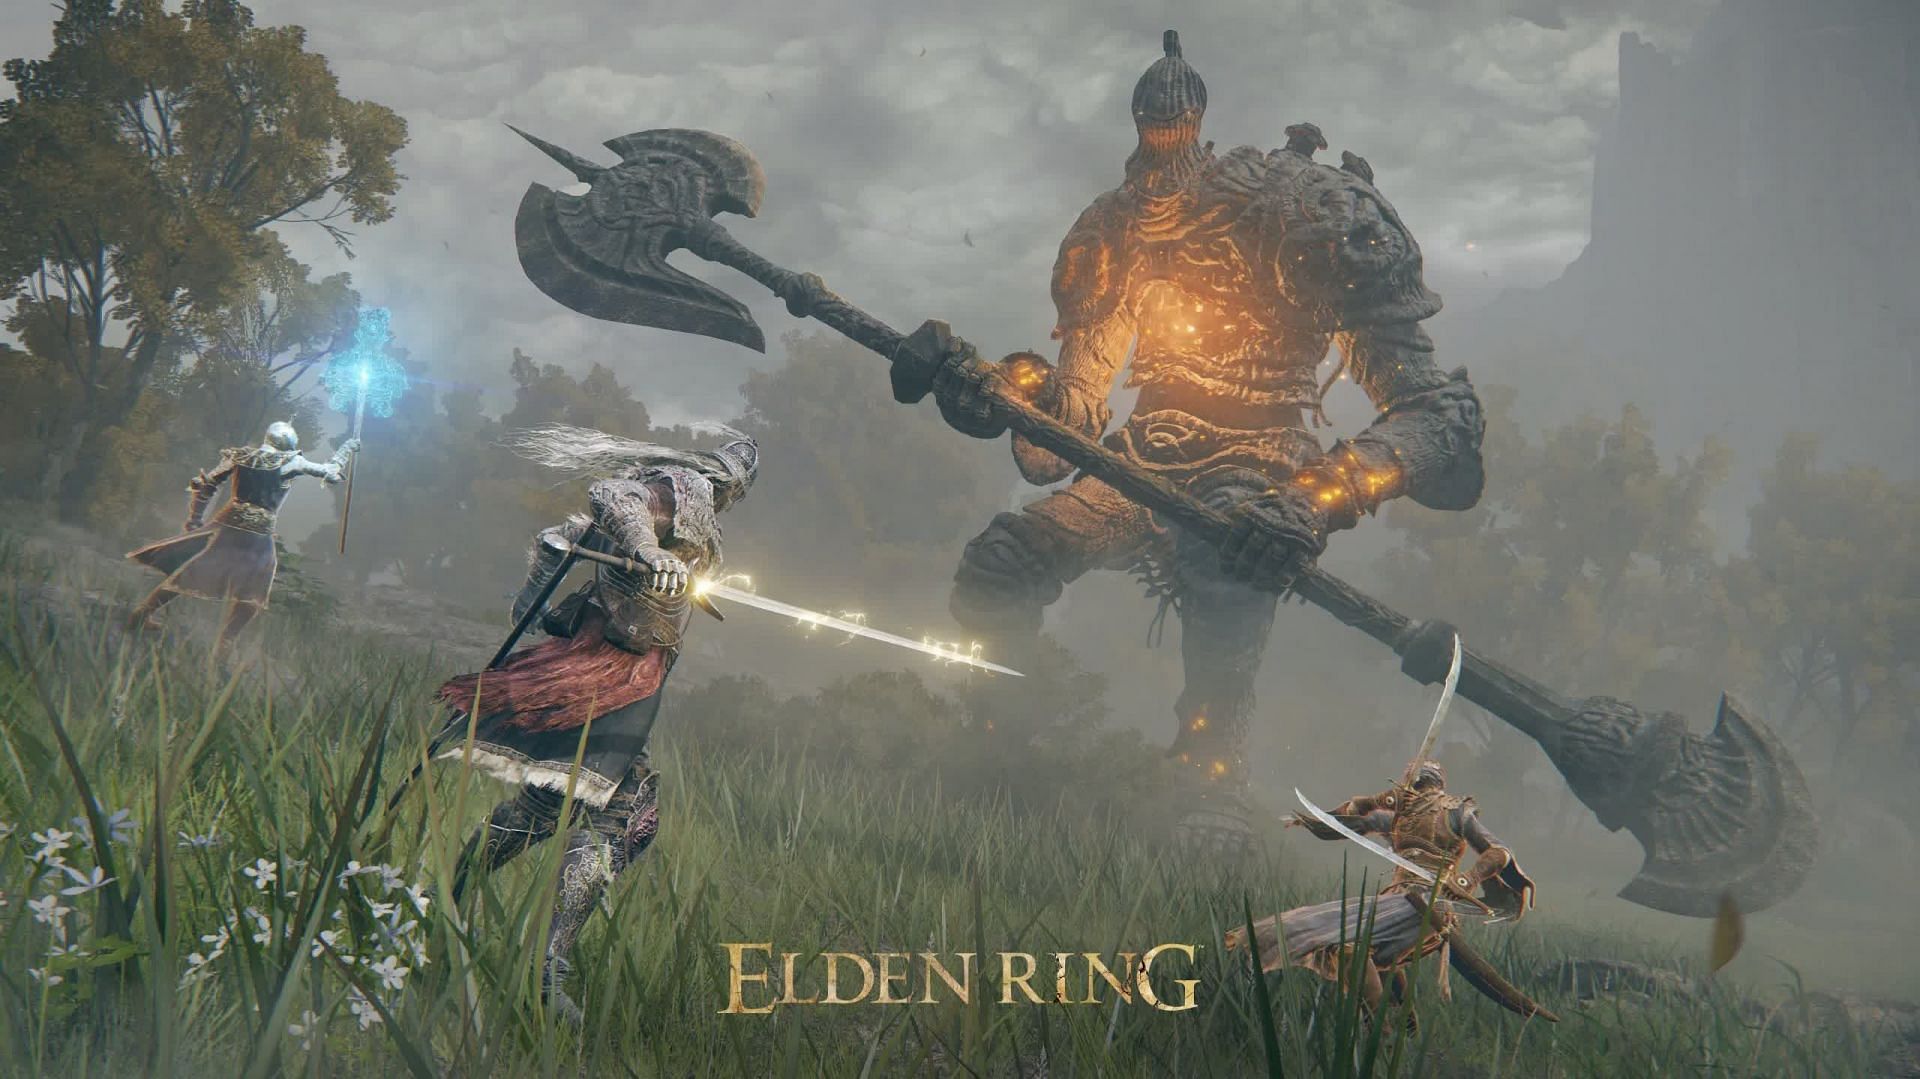 The Gameplay Preview for Elden Ring premieres at 3 PM CET tomorrow (Image via BANDAI NAMCO Europe)